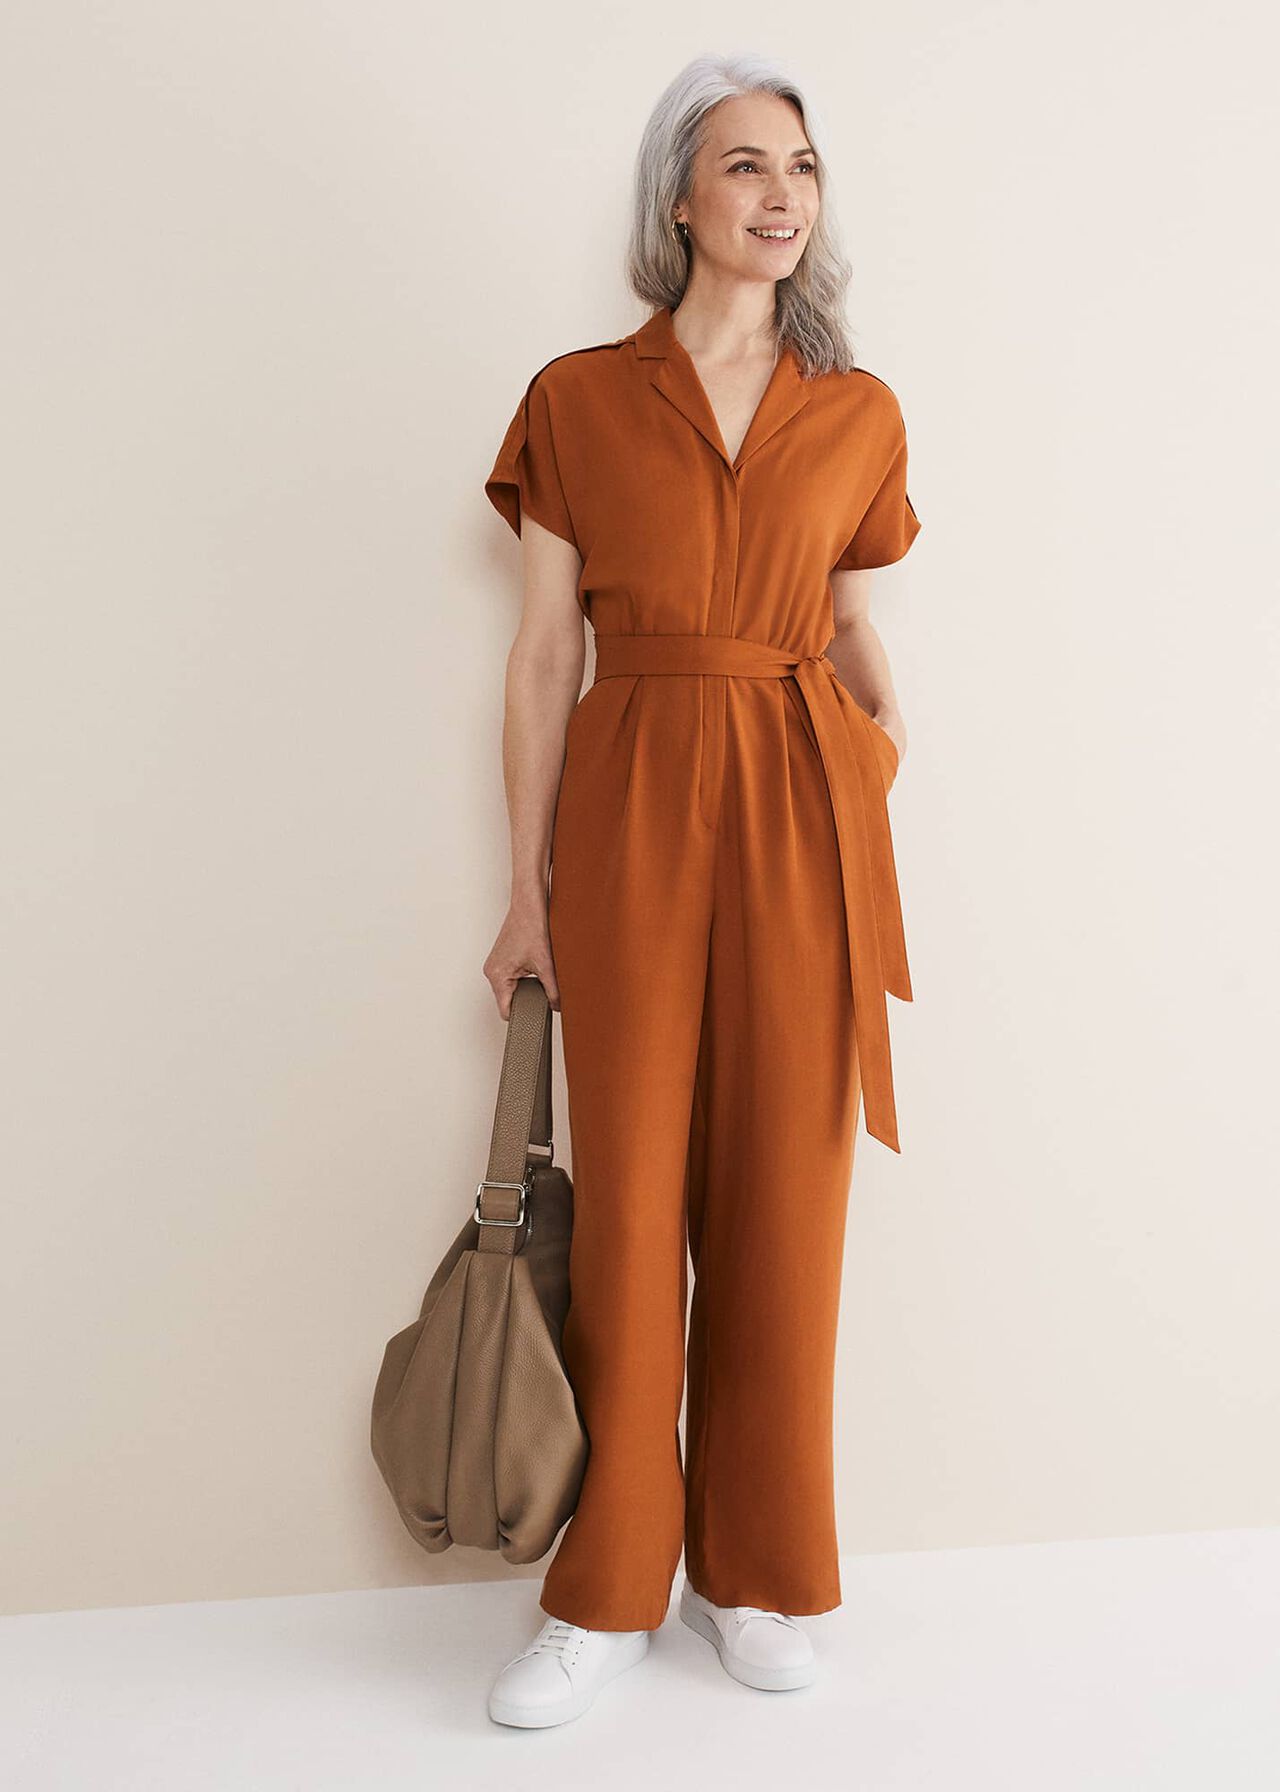 Cora Belted Jumpsuit